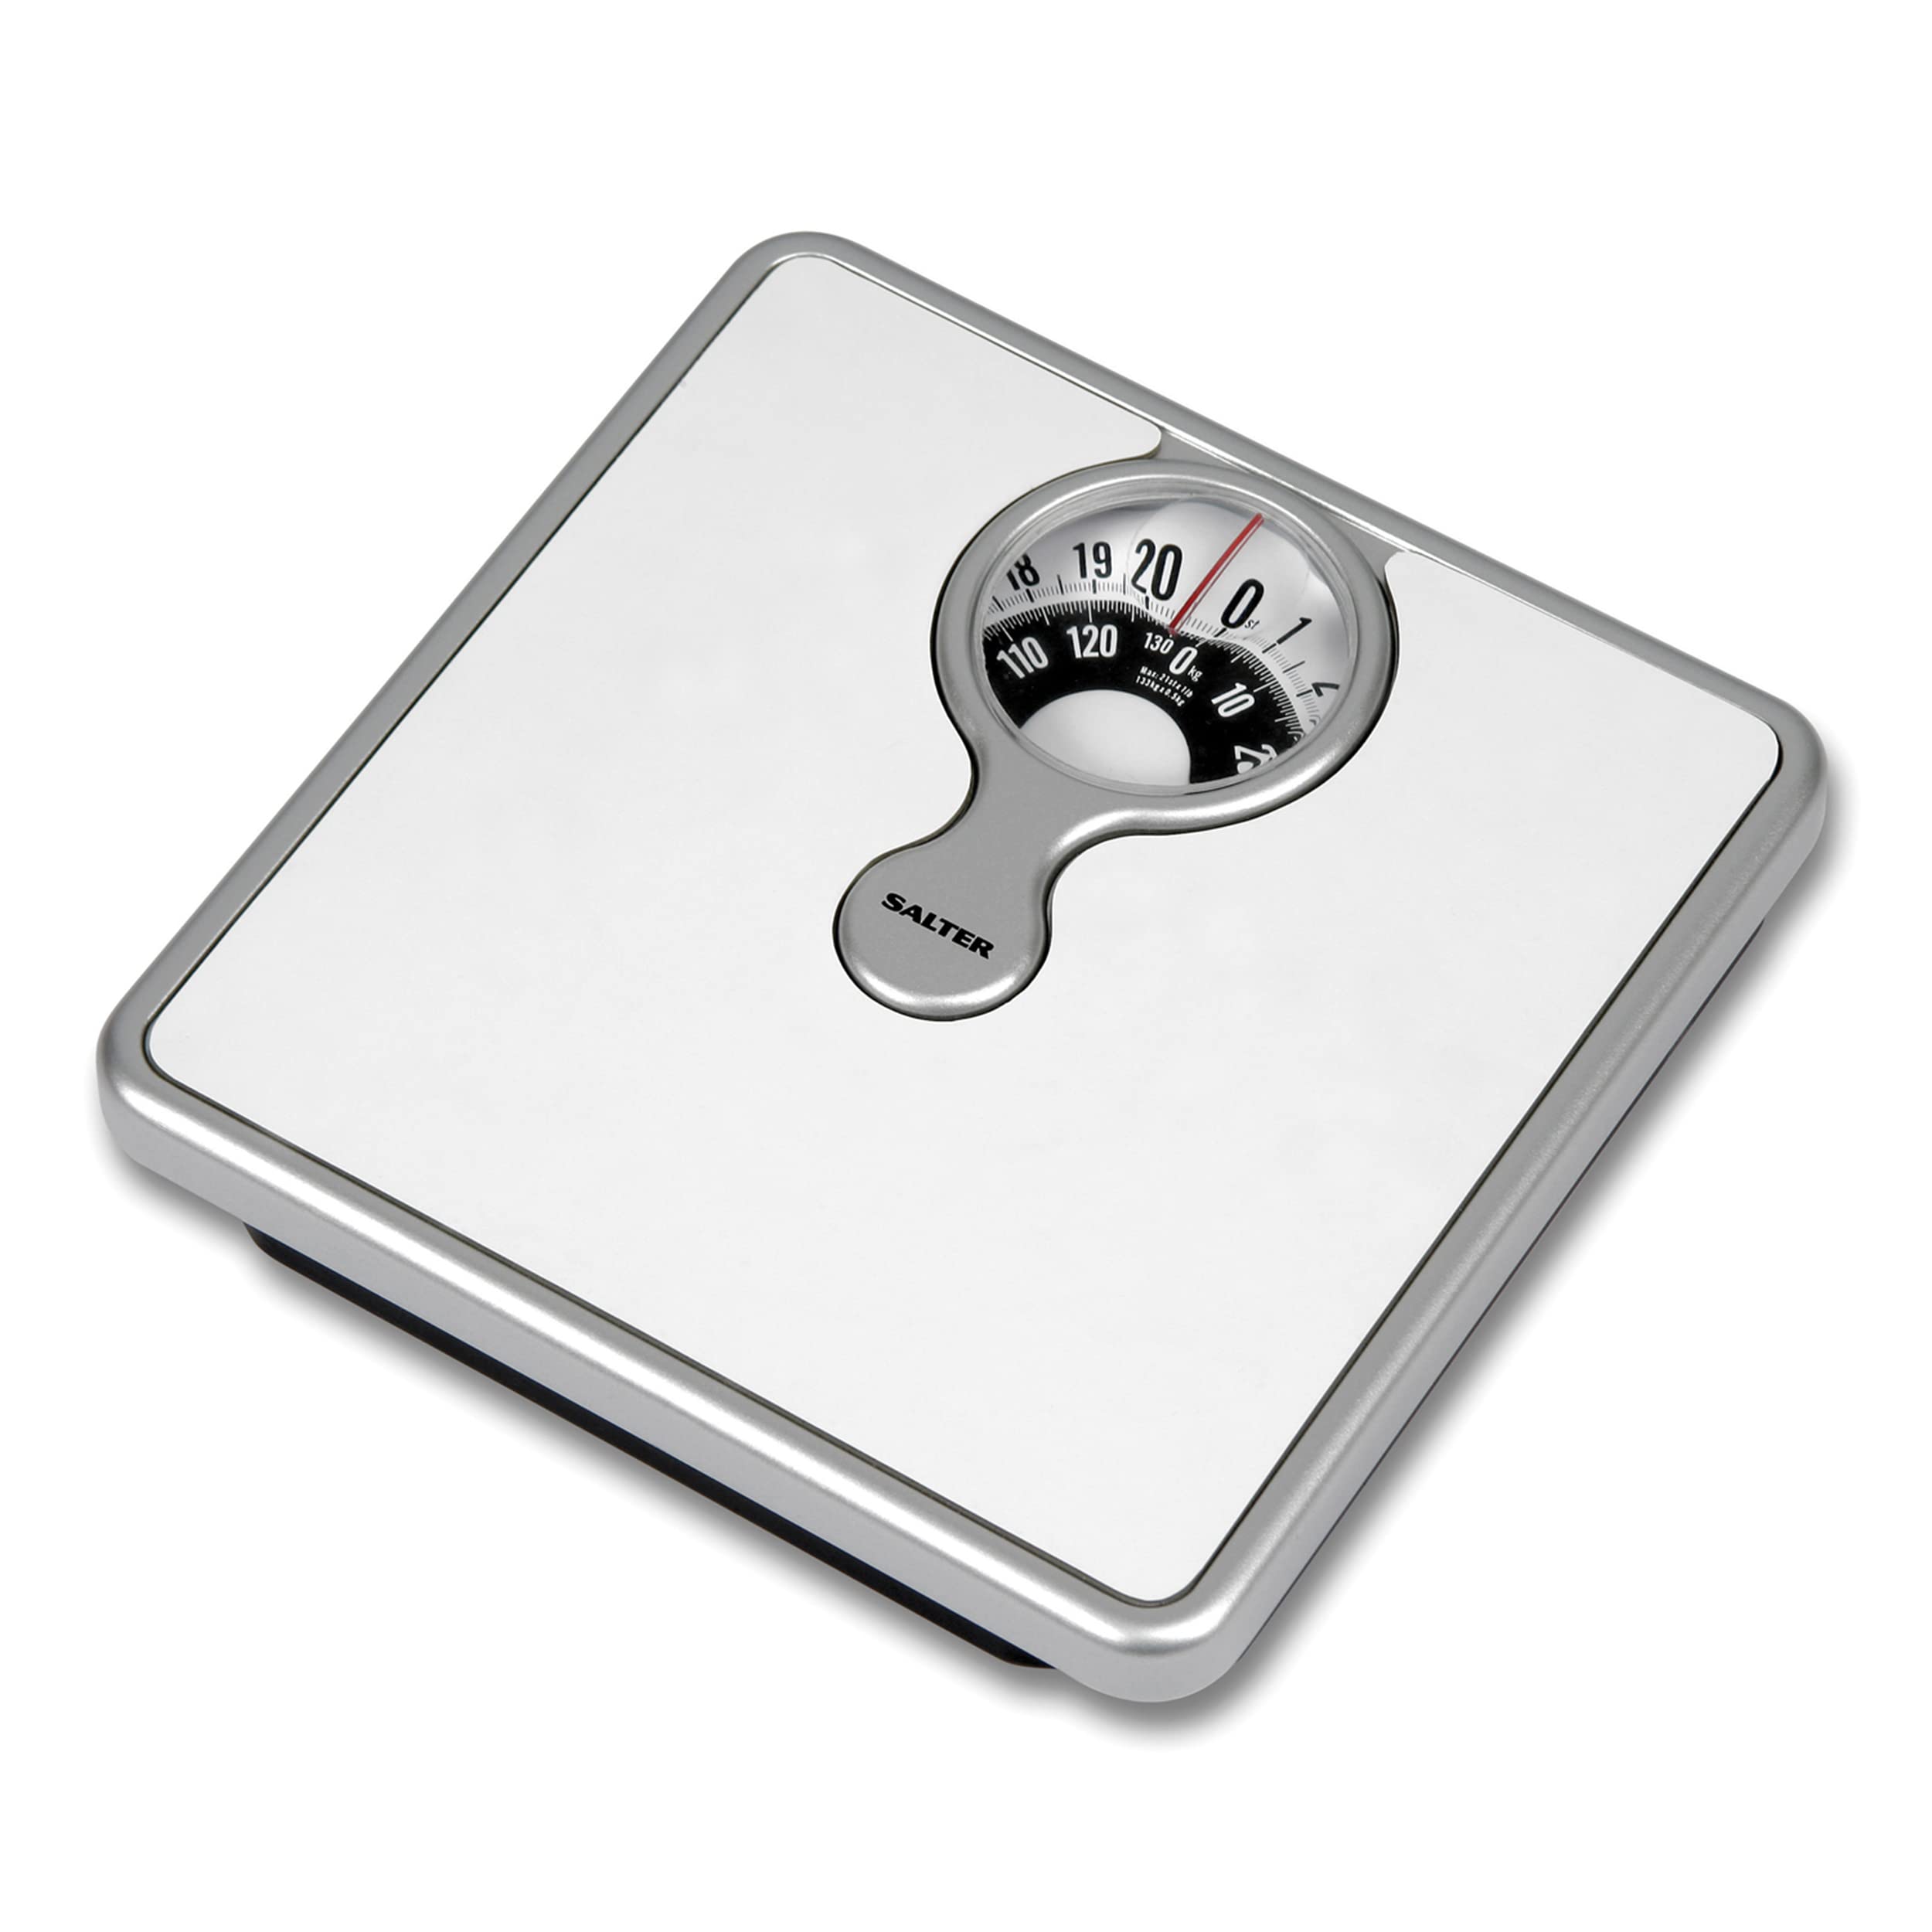 Salter 484 WHDR Magnified Mechanical Scales, 133 KG Maximum Capacity,  Compact Design, Magnifying Lens, Bathroom, Easy to Read Dial, Cushioned, No